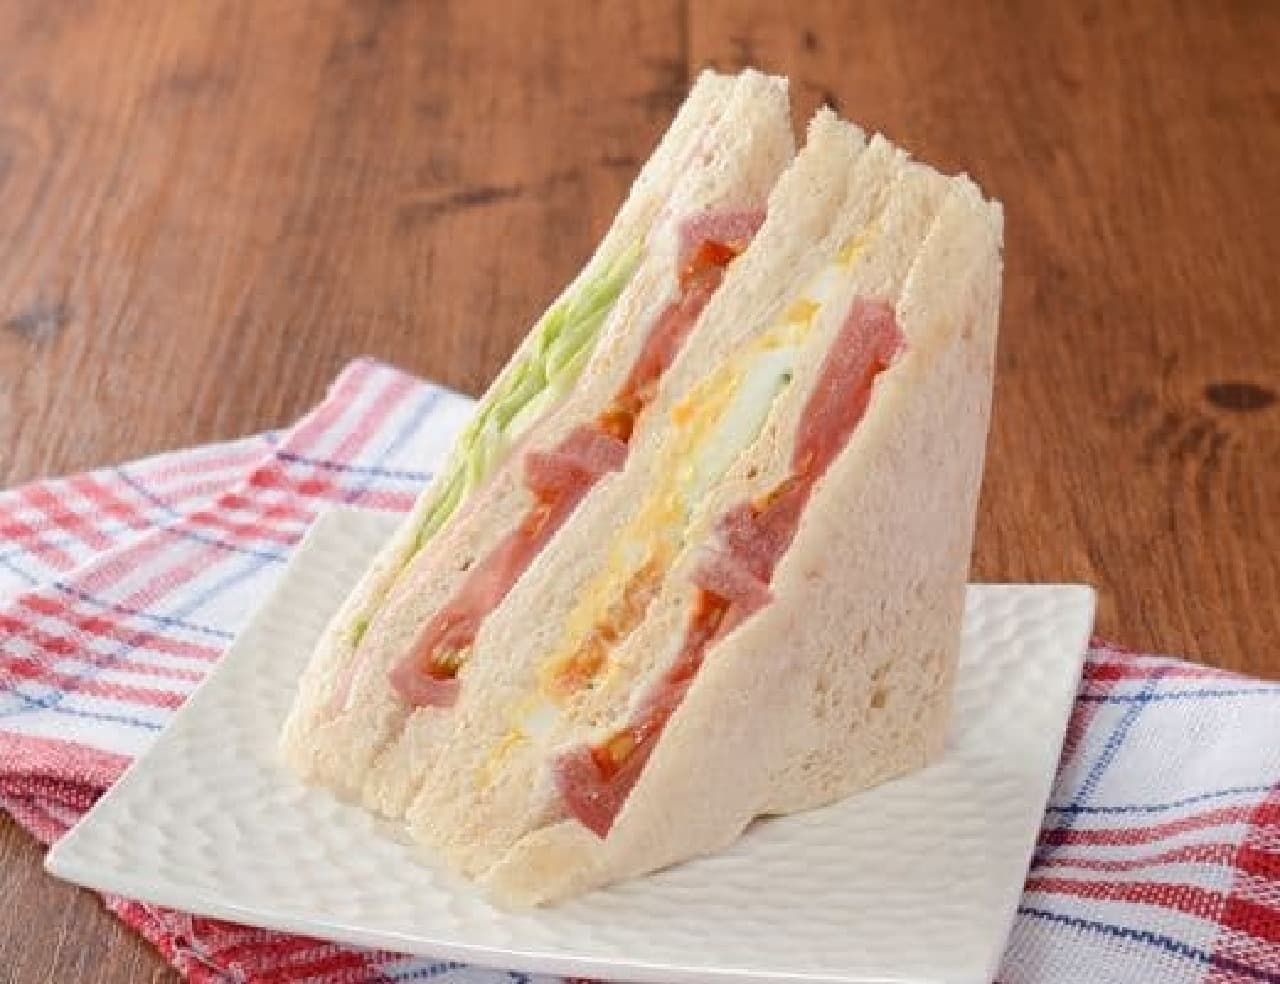 Lawson "Tomato and Vegetable Sandwich